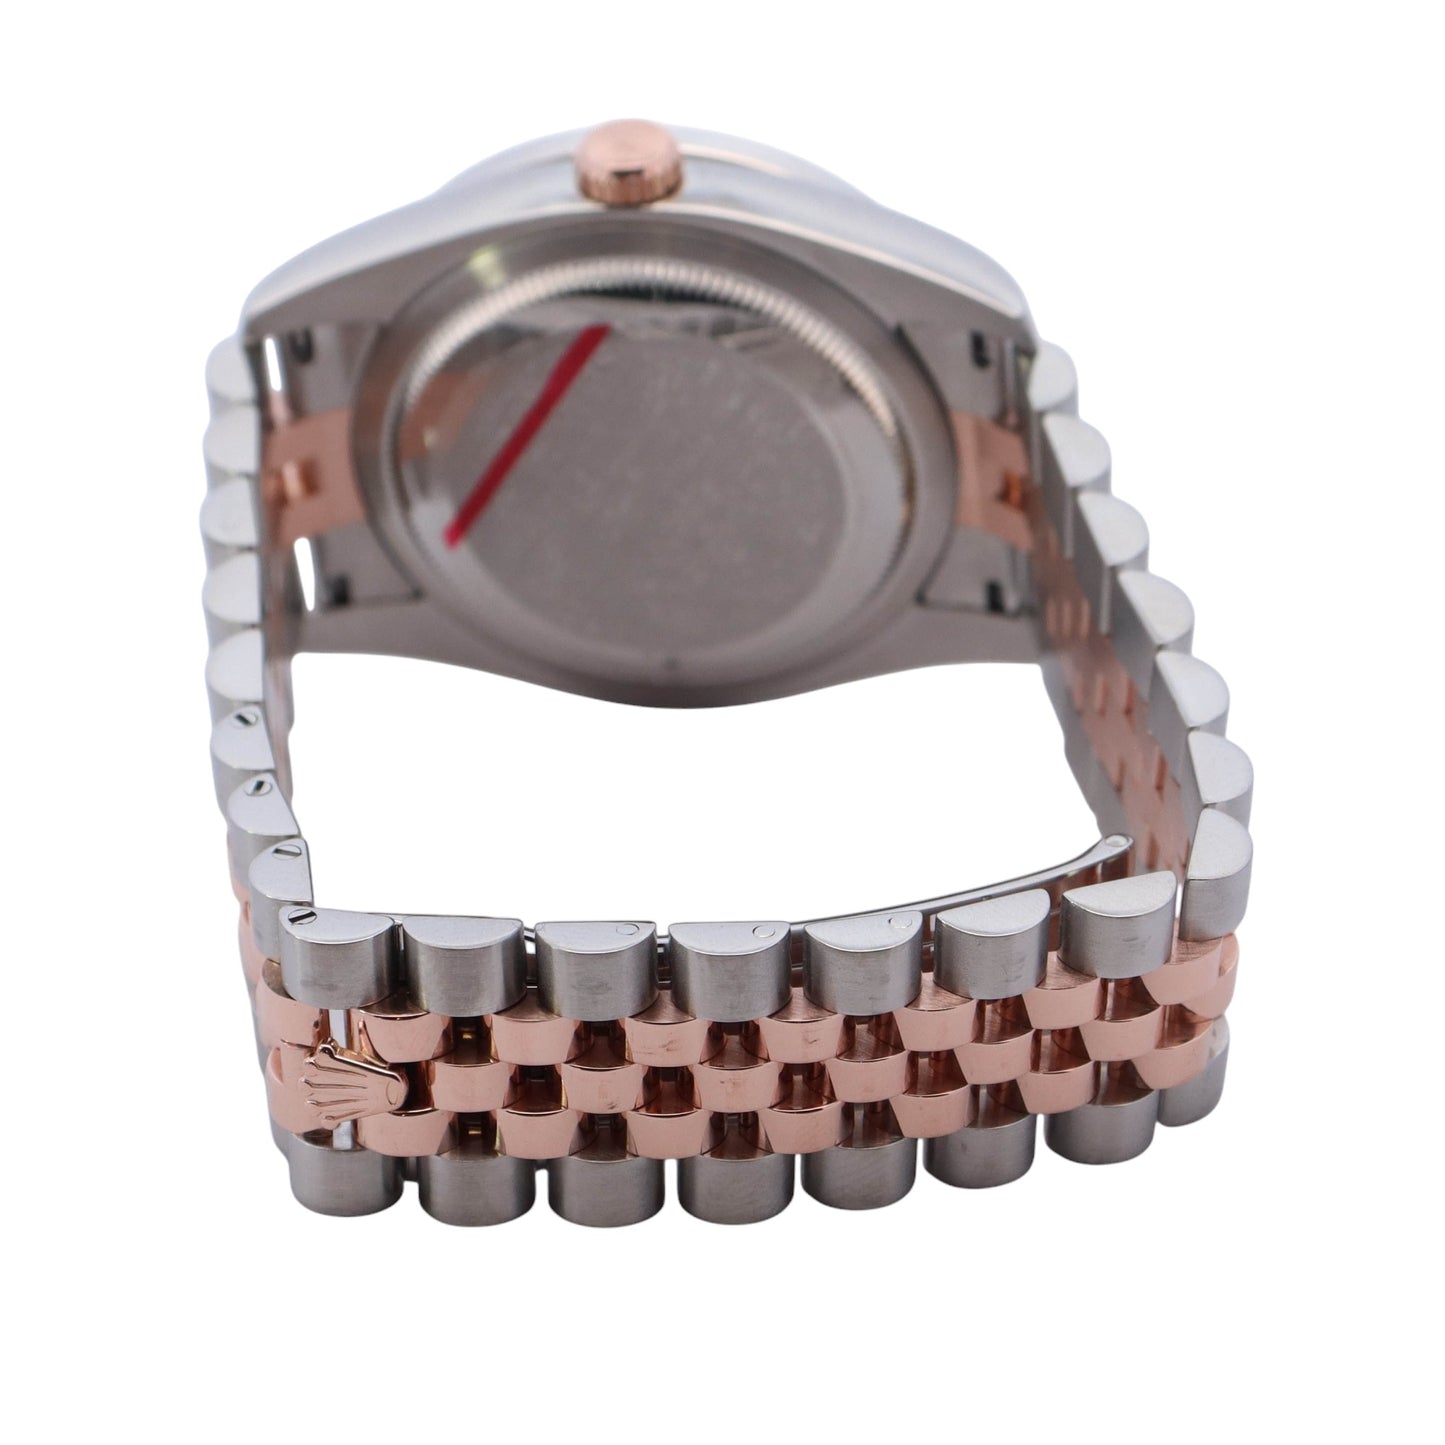 Rolex Datejust Two Tone Rose Gold & Stainless Steel 36mm White Diamond dot Dial Watch Reference #: 116231